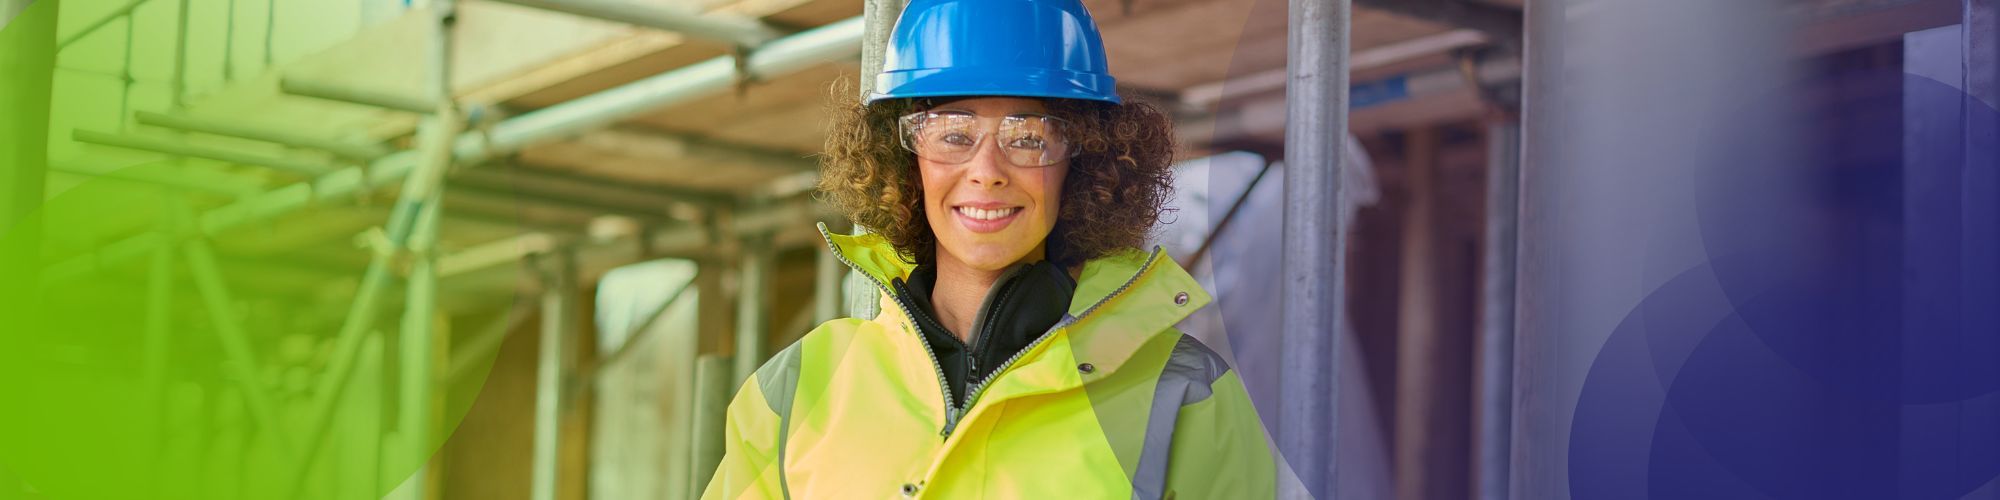 Could technology level gender disparity in Construction?